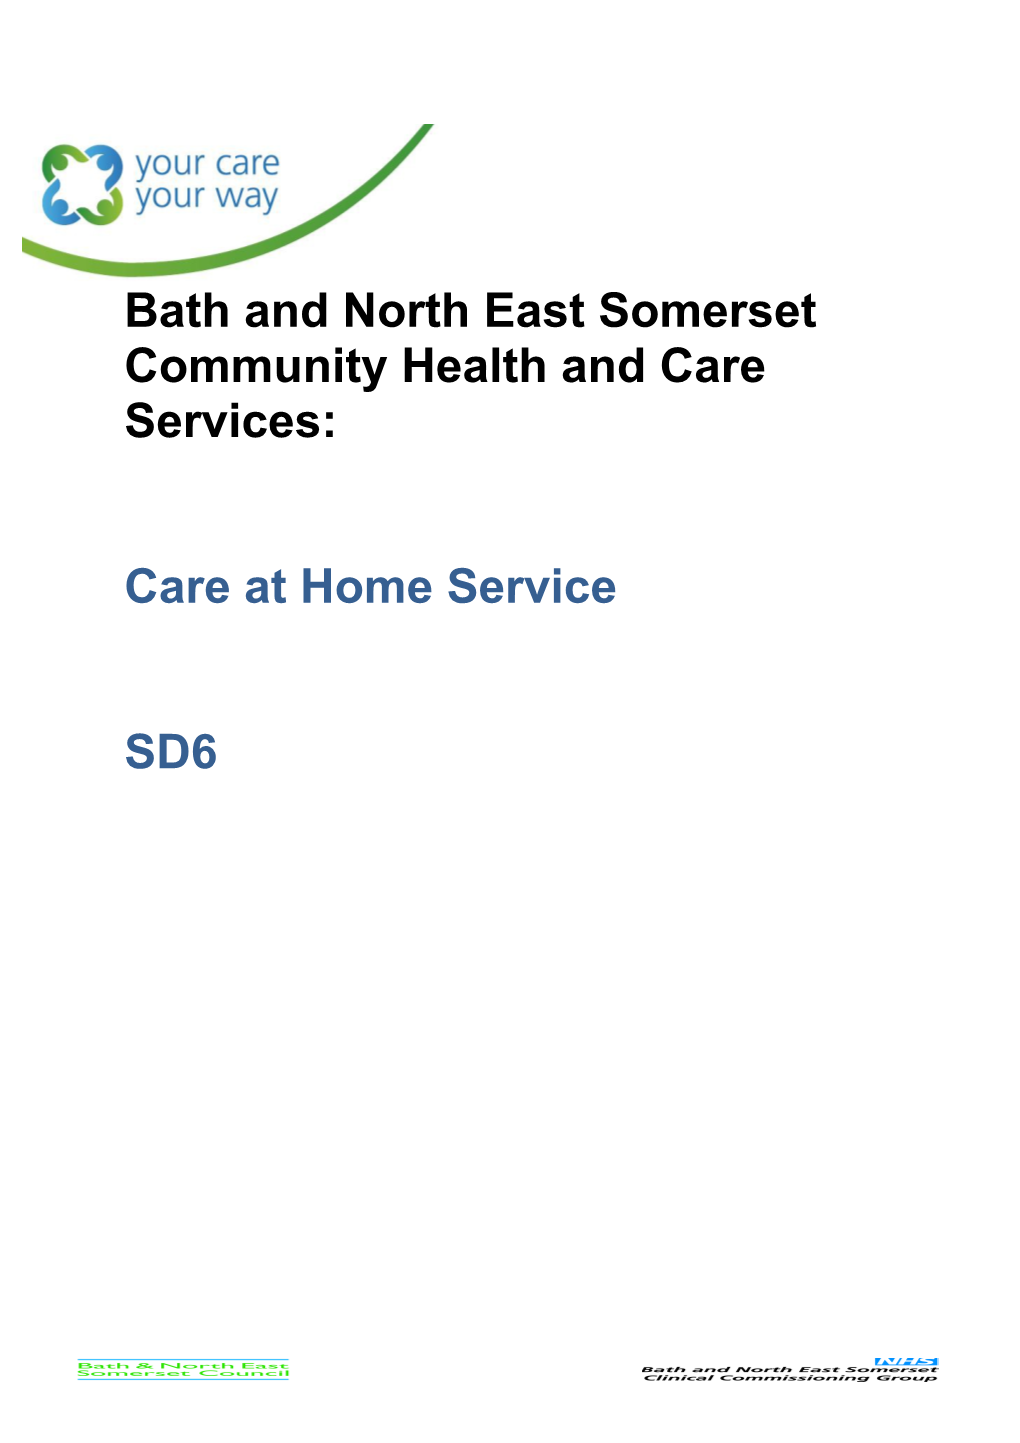 Bath and North East Somerset Community Health and Care Services